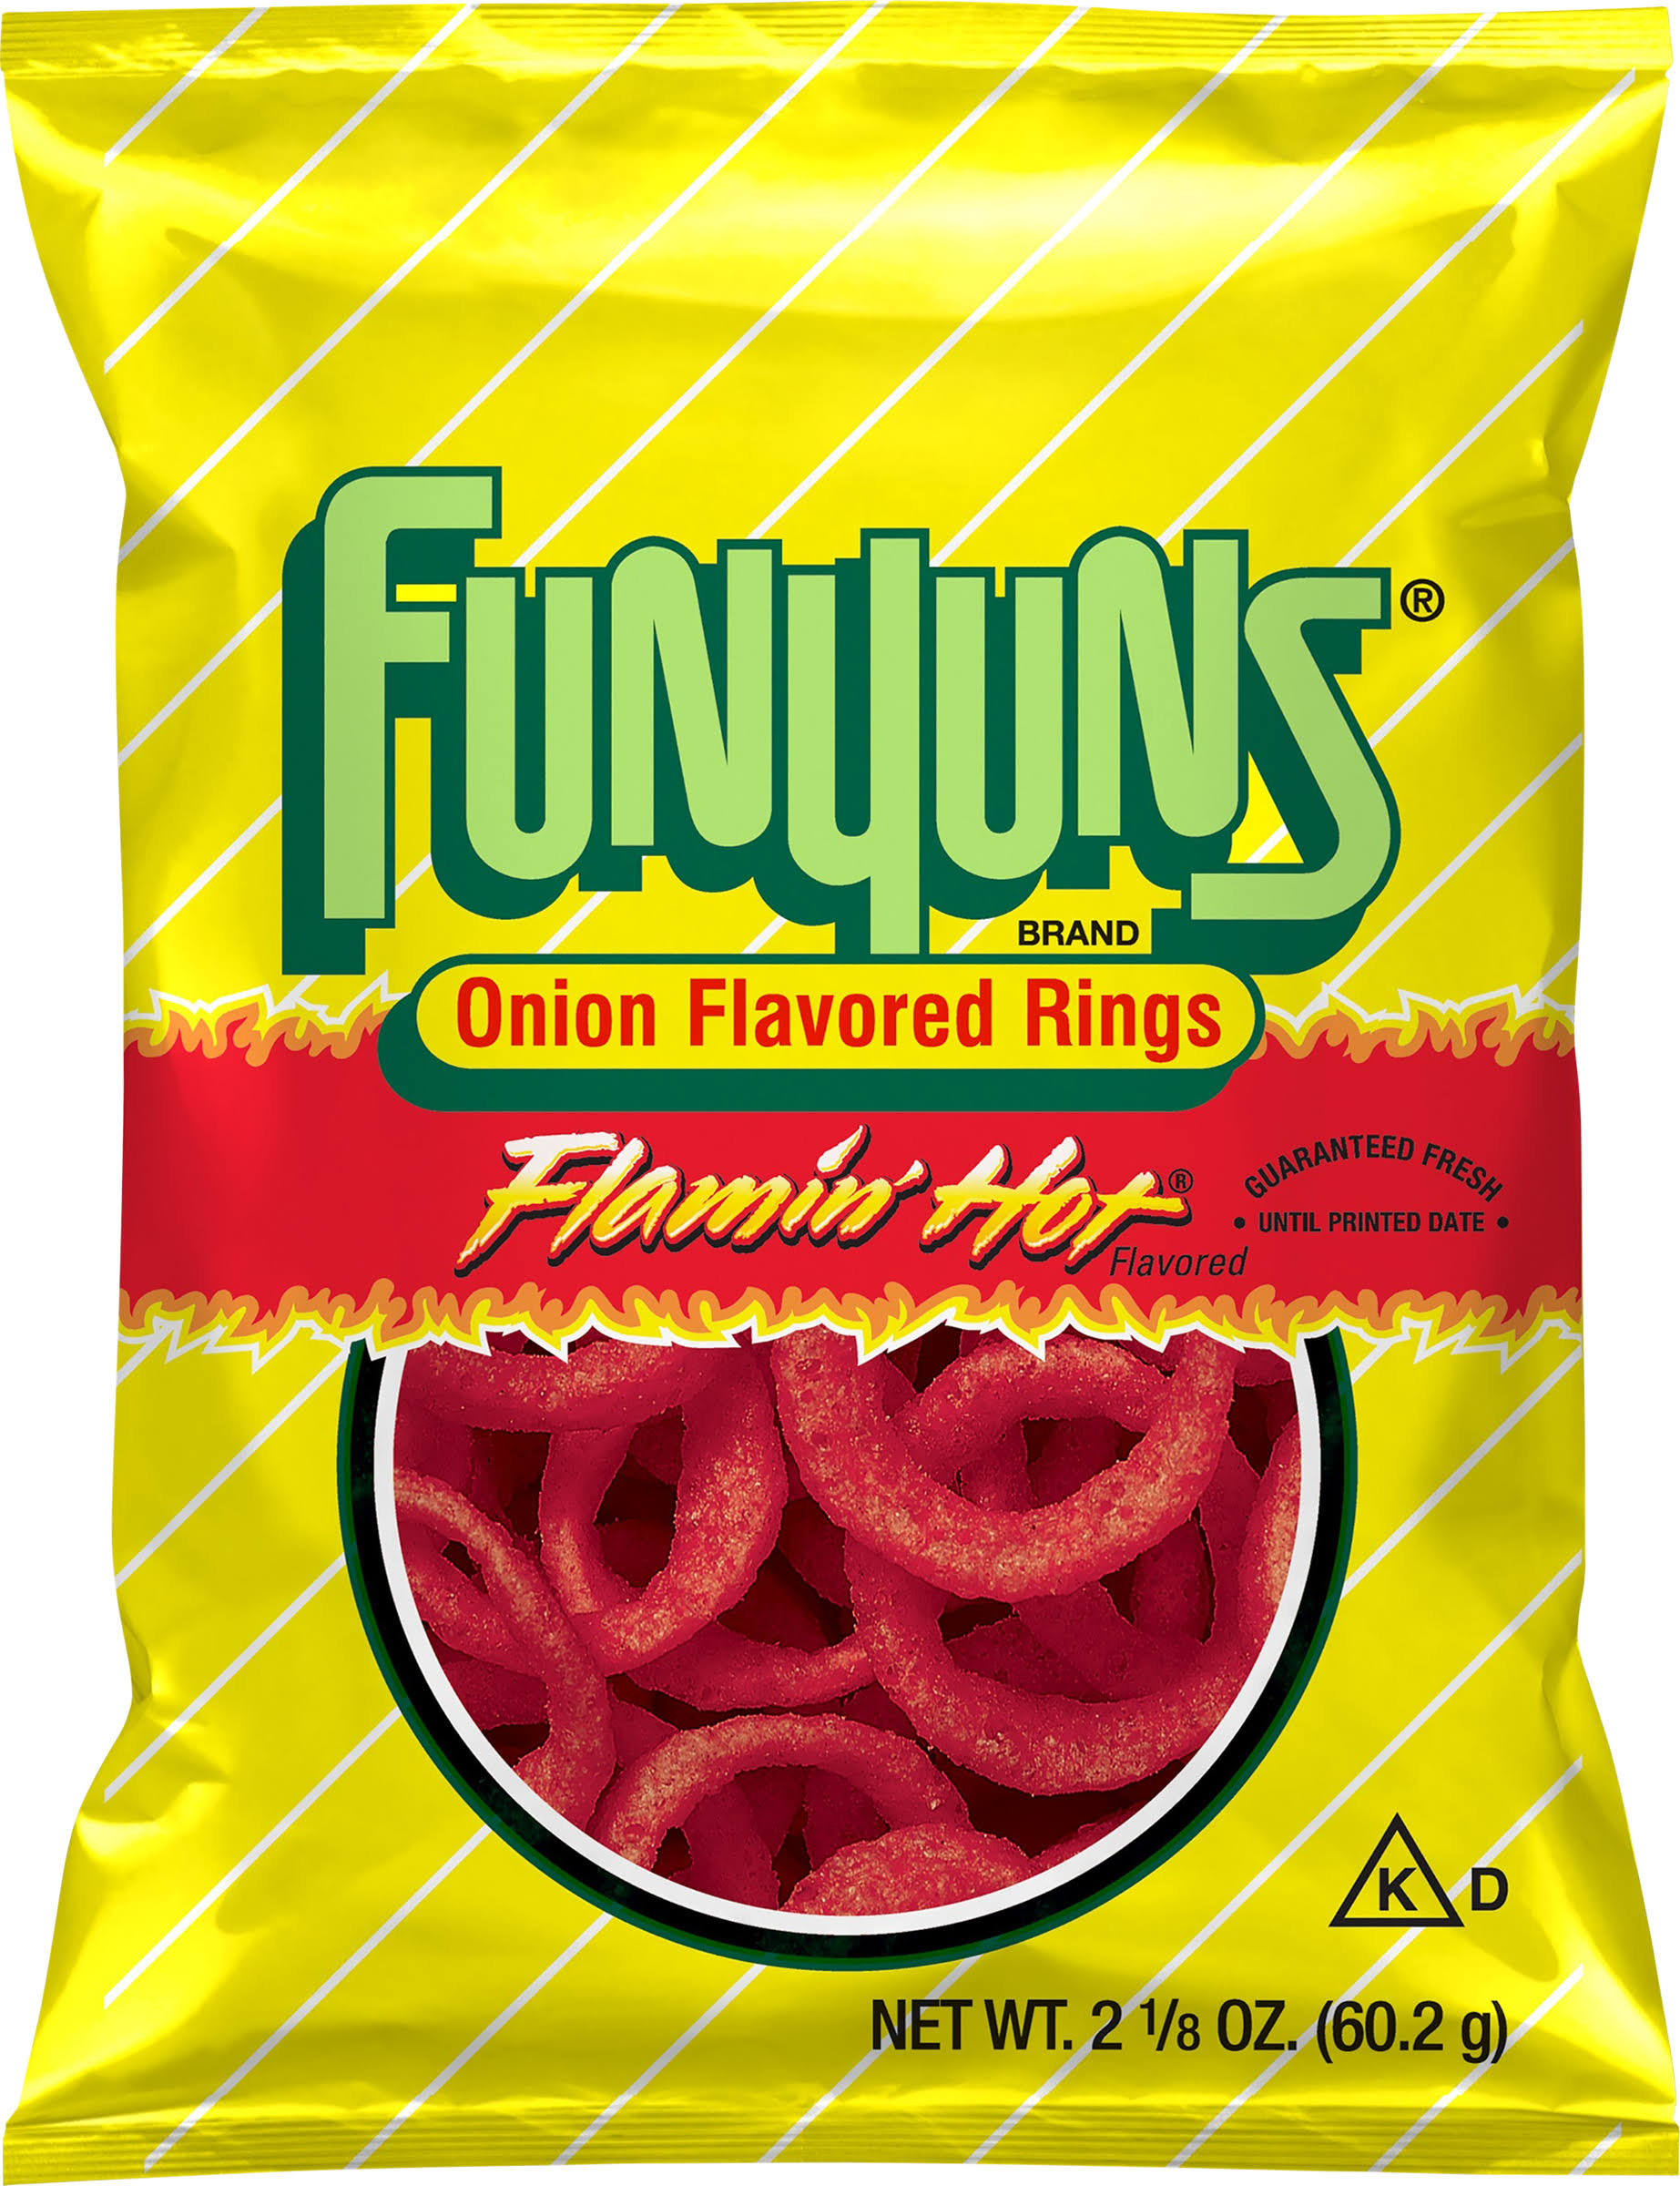 Frito Lay, Funyuns Onion Flavored Rings Flamin' Hot Flavored, 2.1 Ounce